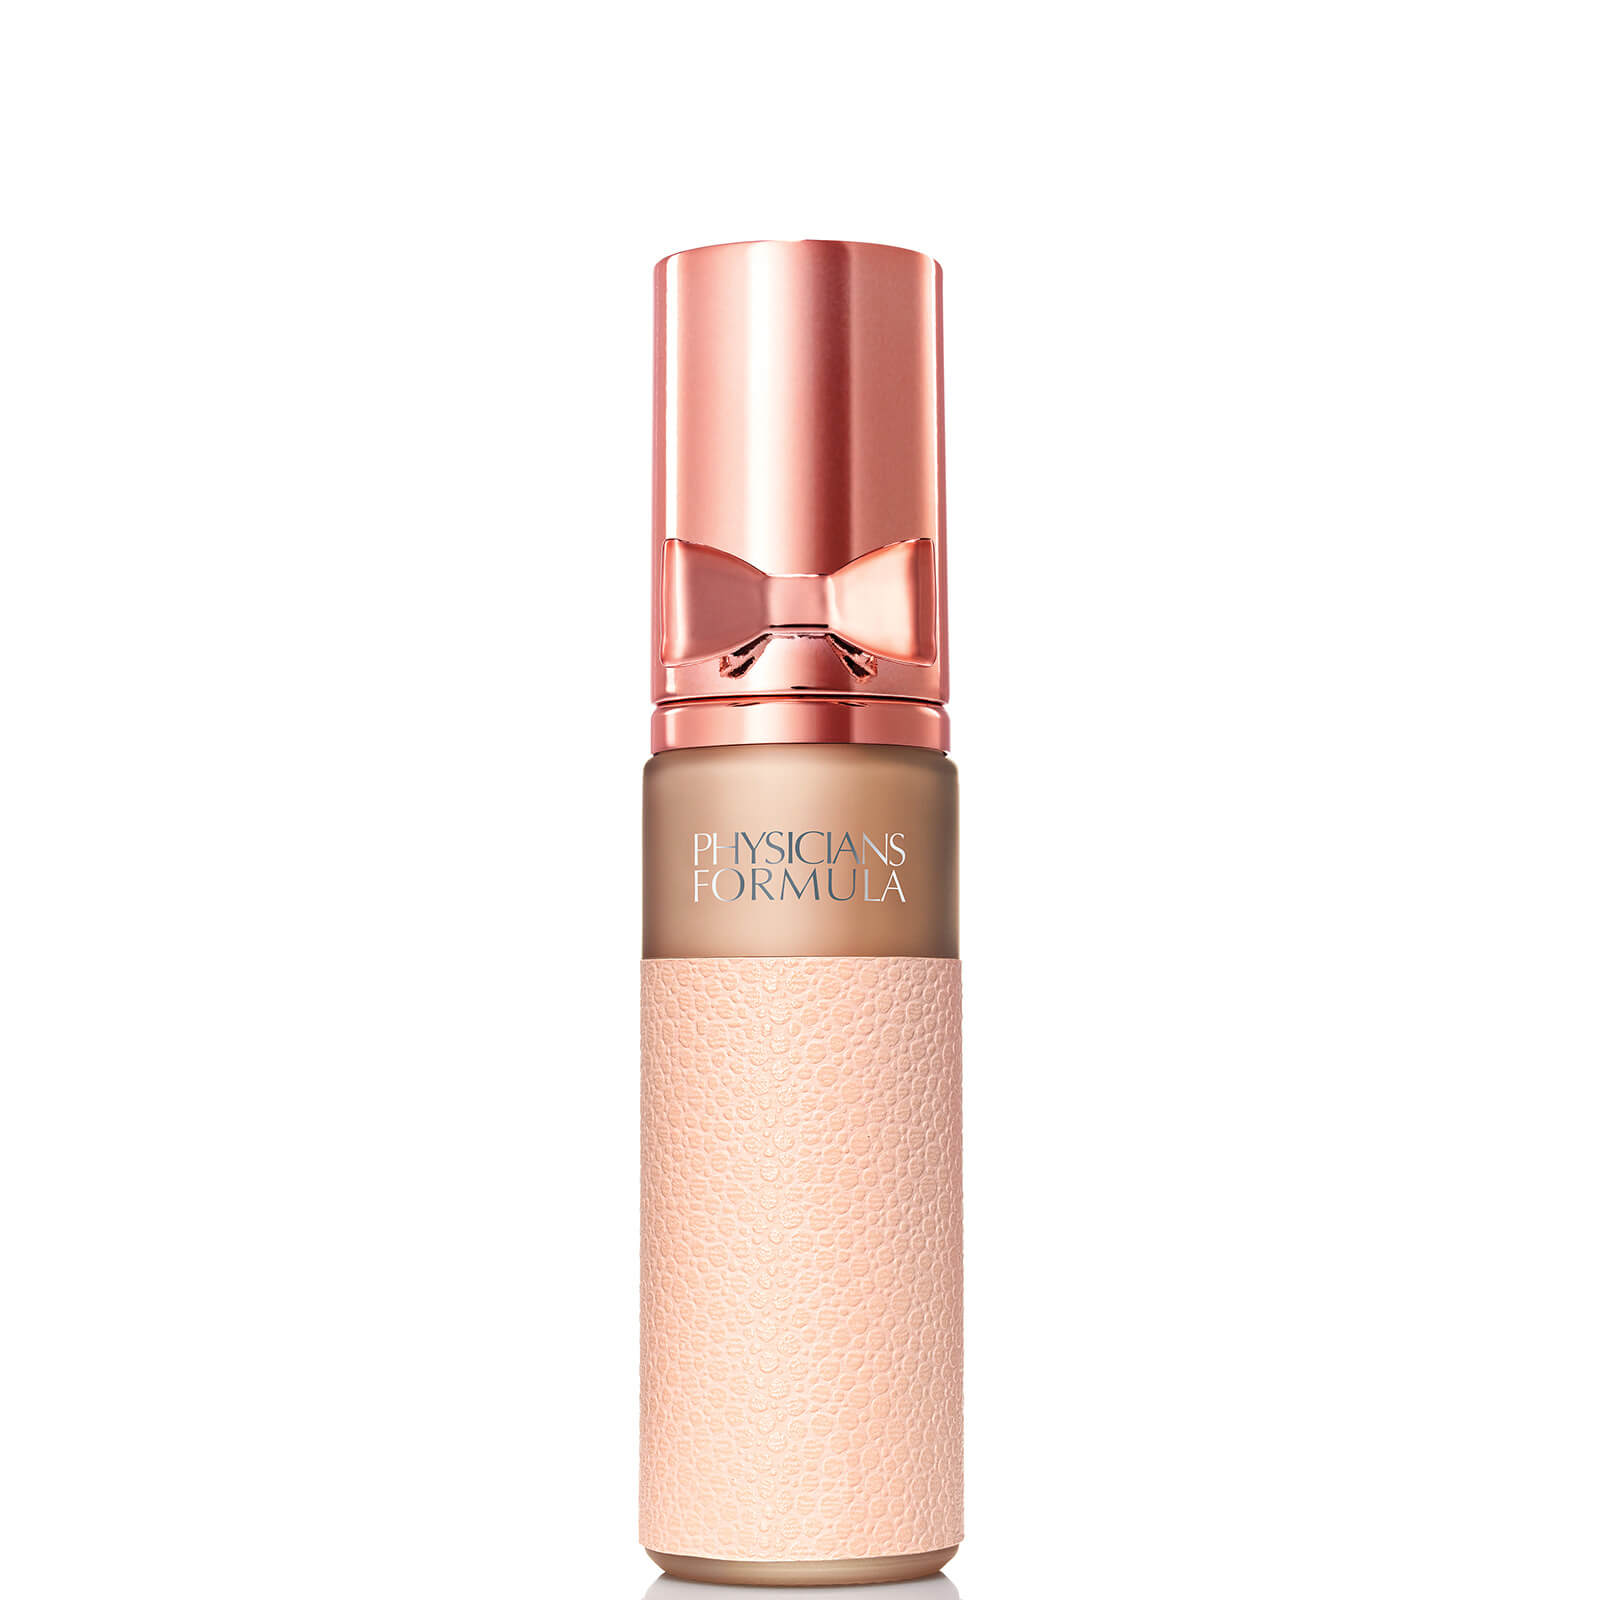 Physicians Formula Nude Wear Touch of Glow Foundation 30ml (Various Shades) - Medium von Physicians Formula